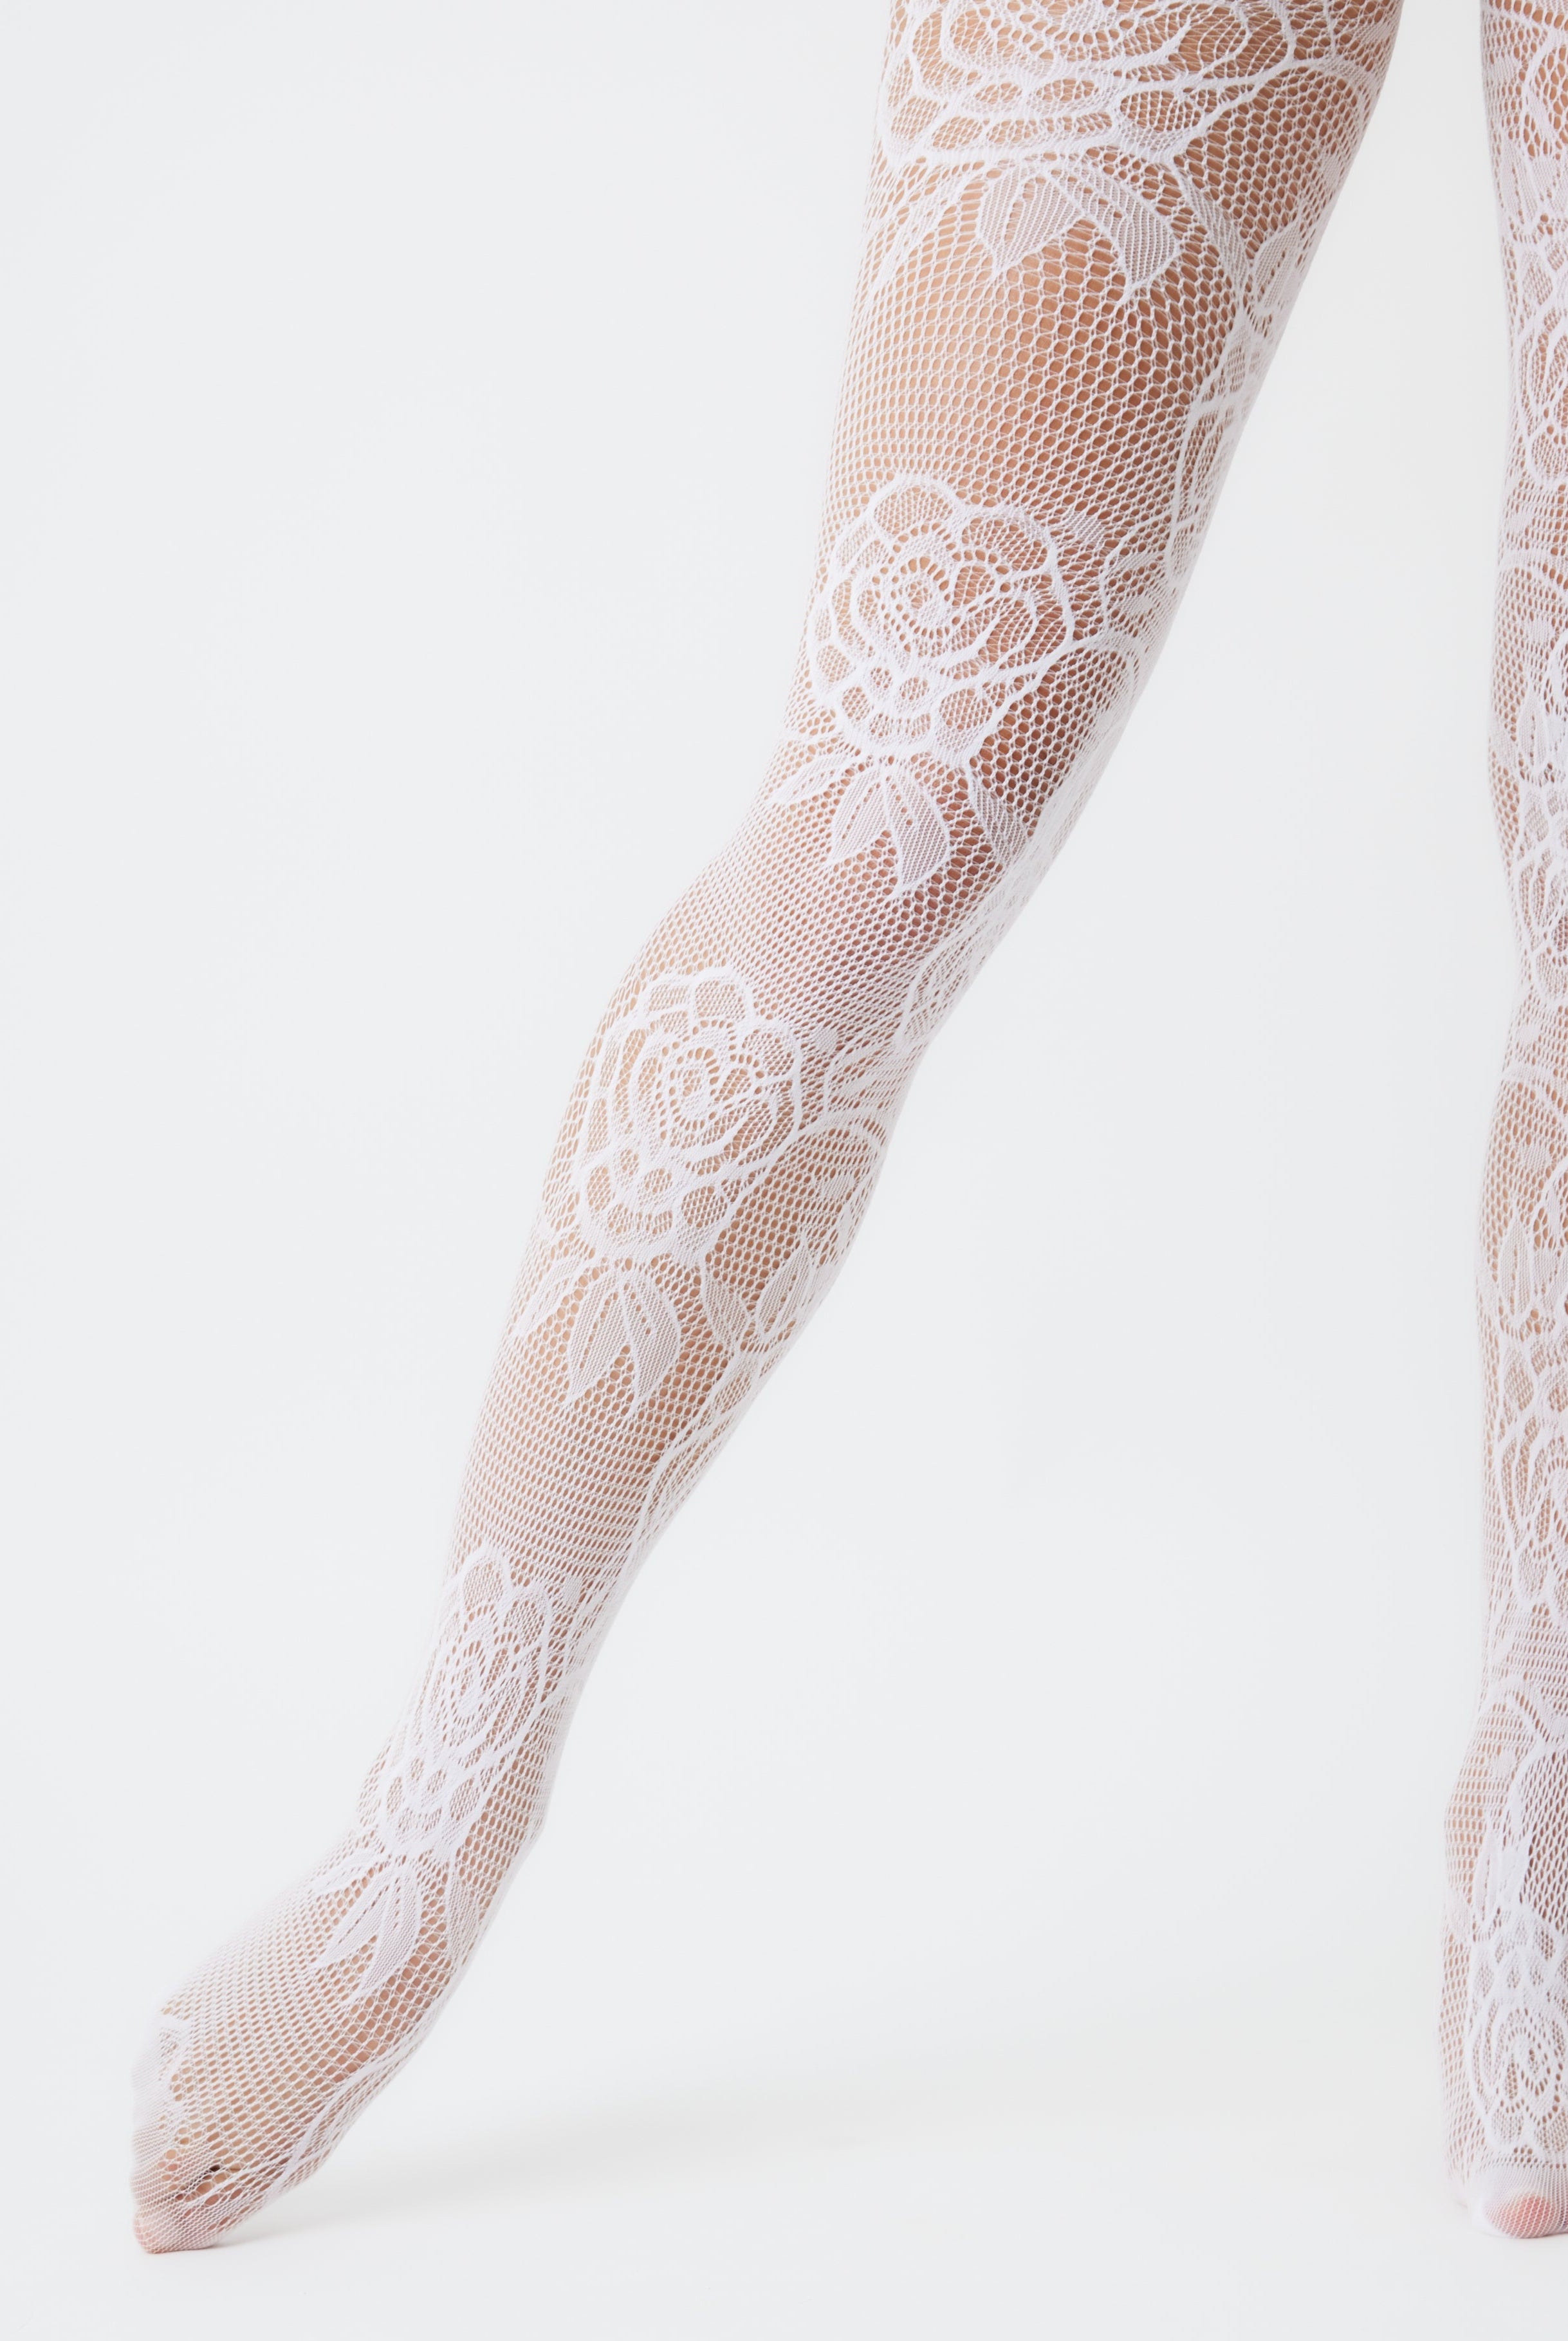 Lace Floral fishnet Tights in White | Hosiery | Floral | Lace | White | Tights | Fishnet | Lolita | Soft e girl | Whimsygoth | Balletcore | ballet sleaze | Plaza Core | Grunge sleaze | coquette | Autumn | Winter | Accessories | Accessory | Women | Winter accessories | Autumn Accessories | trending accessories | streetwear | Streetstyle | 